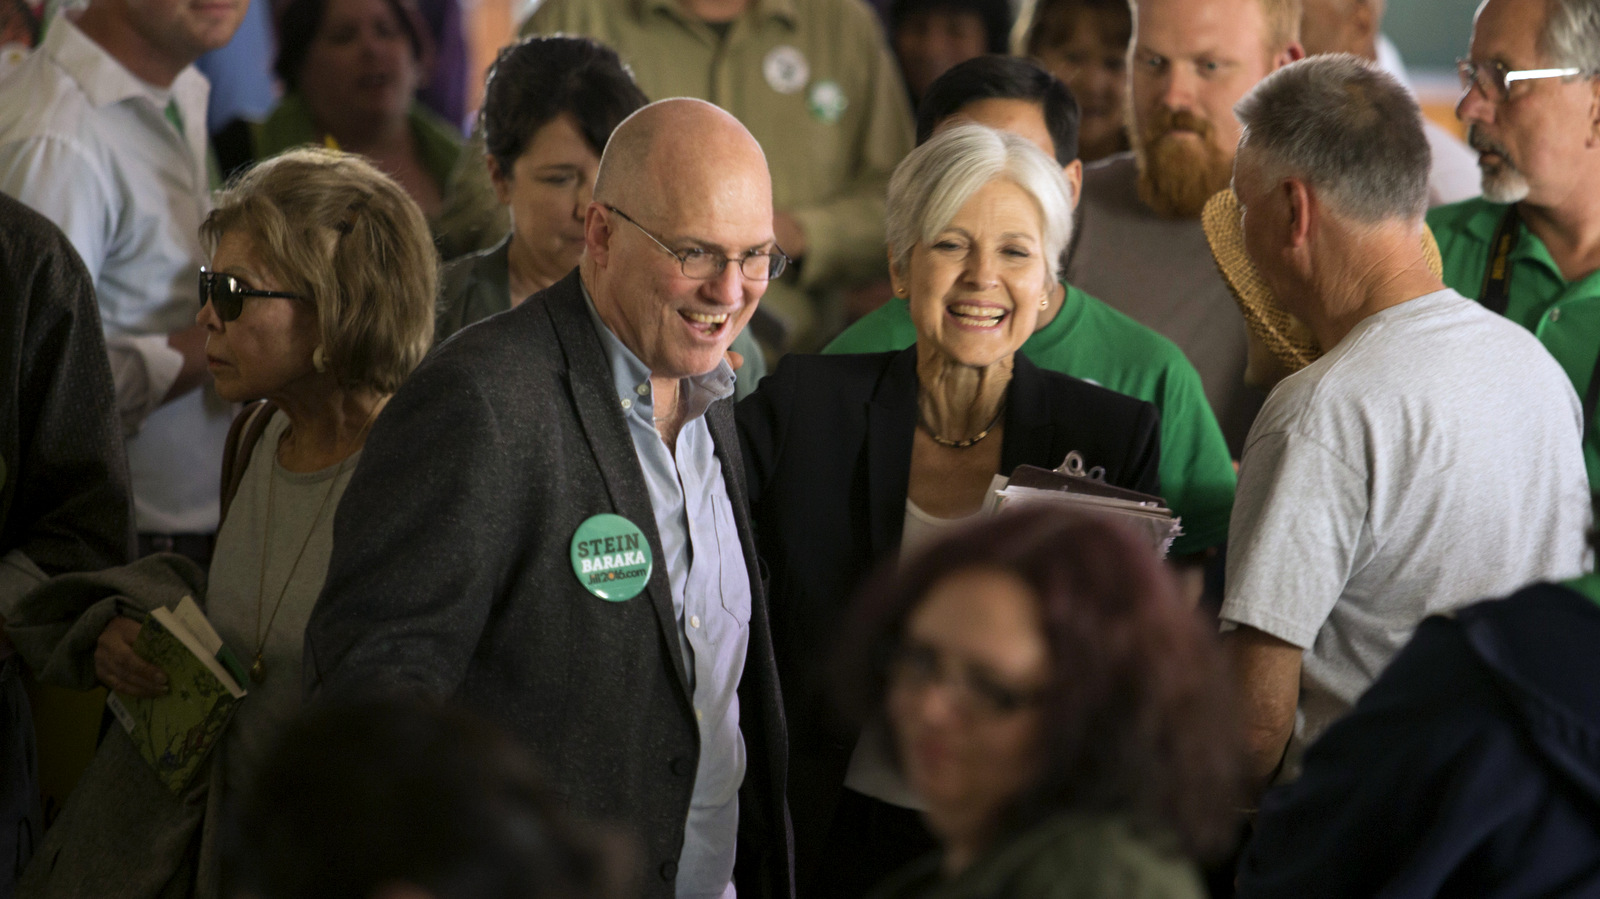 Accompanied by 2004 presidential candidate David Cobb, left, Green party presidential hopeful Jill Stein meets her supporters during a campaign stop at Humanist Hall in Oakland, Calif. Oct. 6, 2016. (AP/D. Ross Cameron)